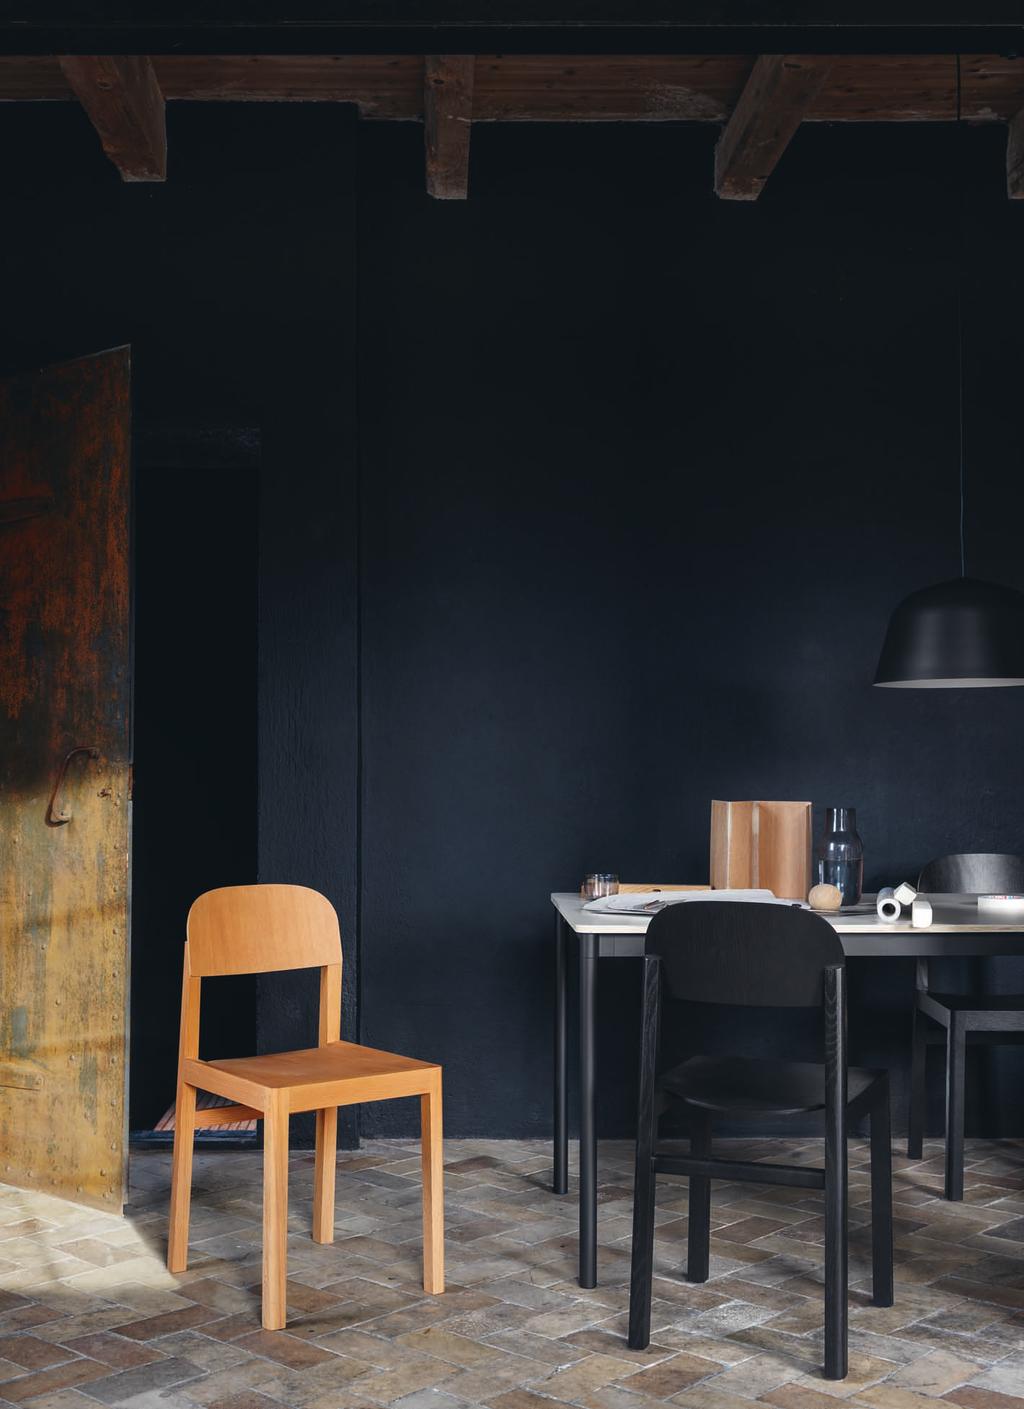 The WORKSHOP Chair brings a playful approach to the wooden chair. The design creates a new perspective on archetypical Scandinavian design through its thin back Lav compile/ sideboard.